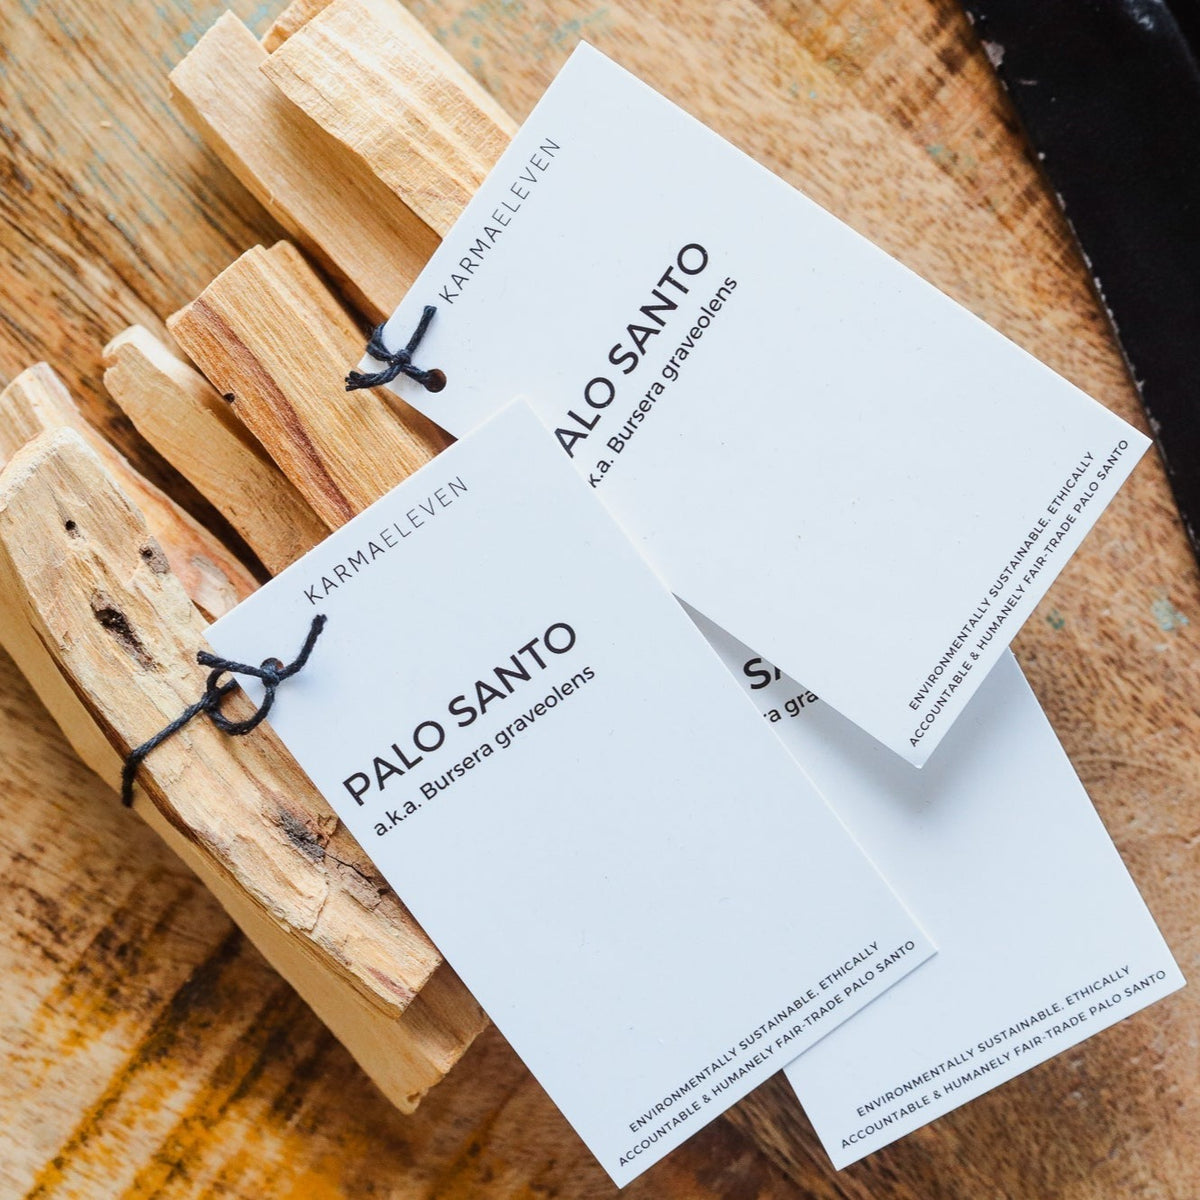 Palo Santo Bundles - 3 pack (Fair trade, ethically sourced)